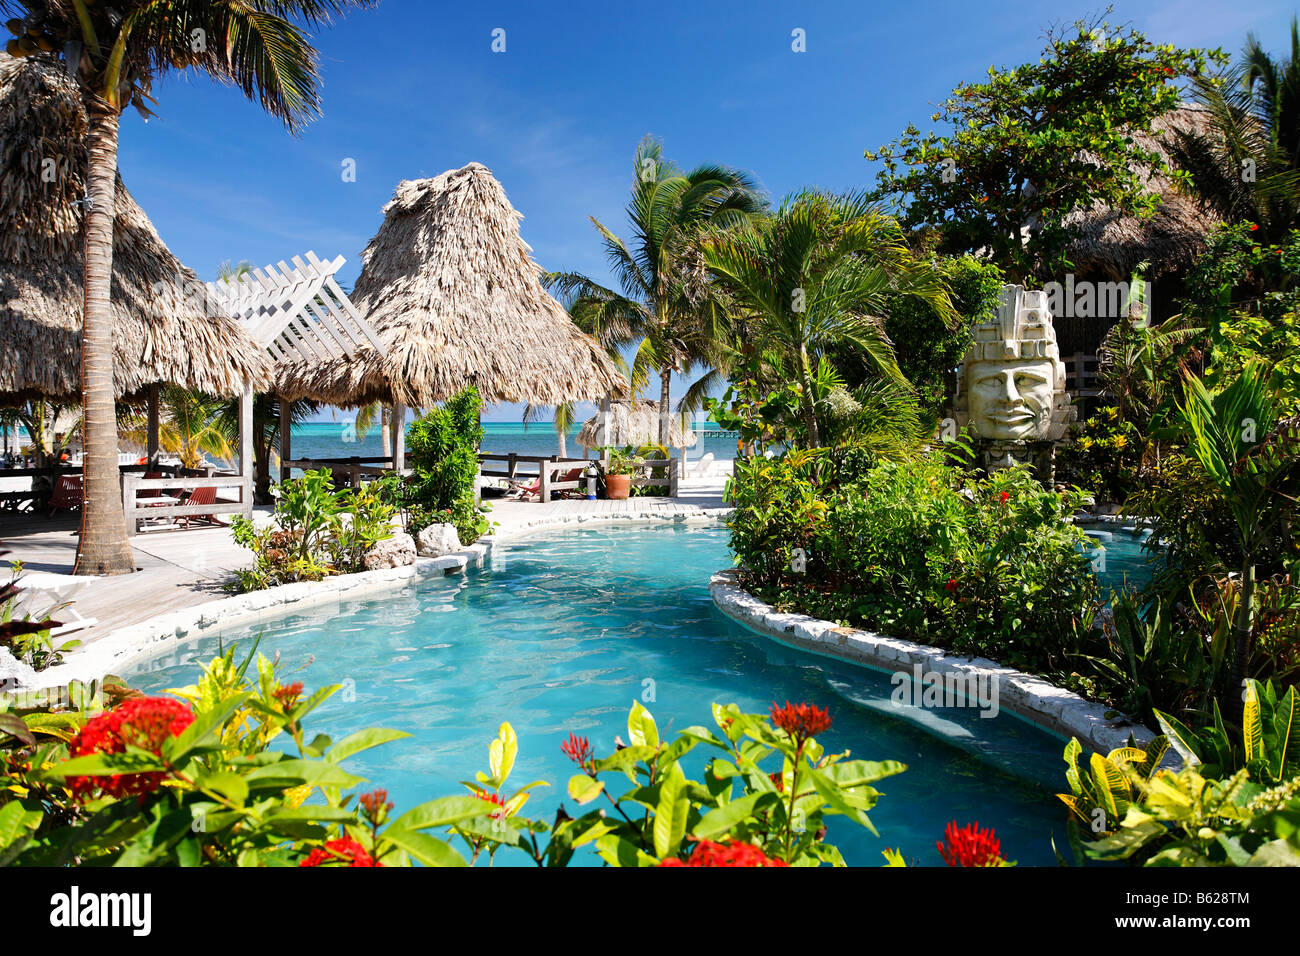 Hotel swimming pool with views onto the ocean, San Pedro, Ambergris Cay Island, Belize, Central America, Caribbean Stock Photo